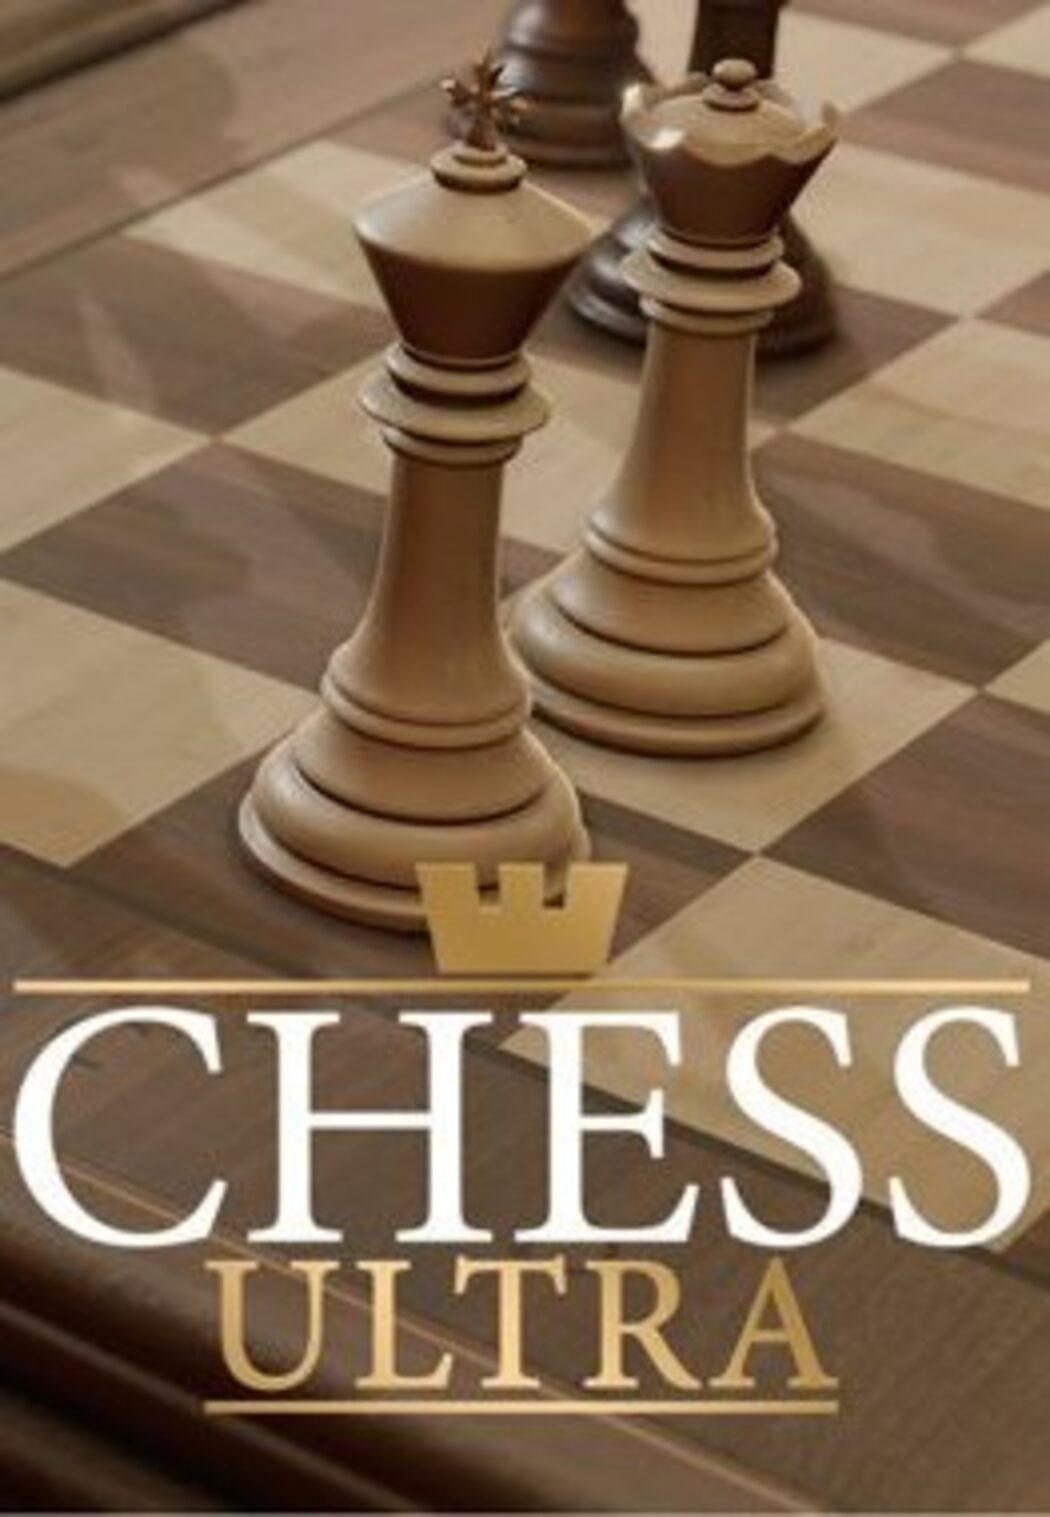 FPS Chess system requirements